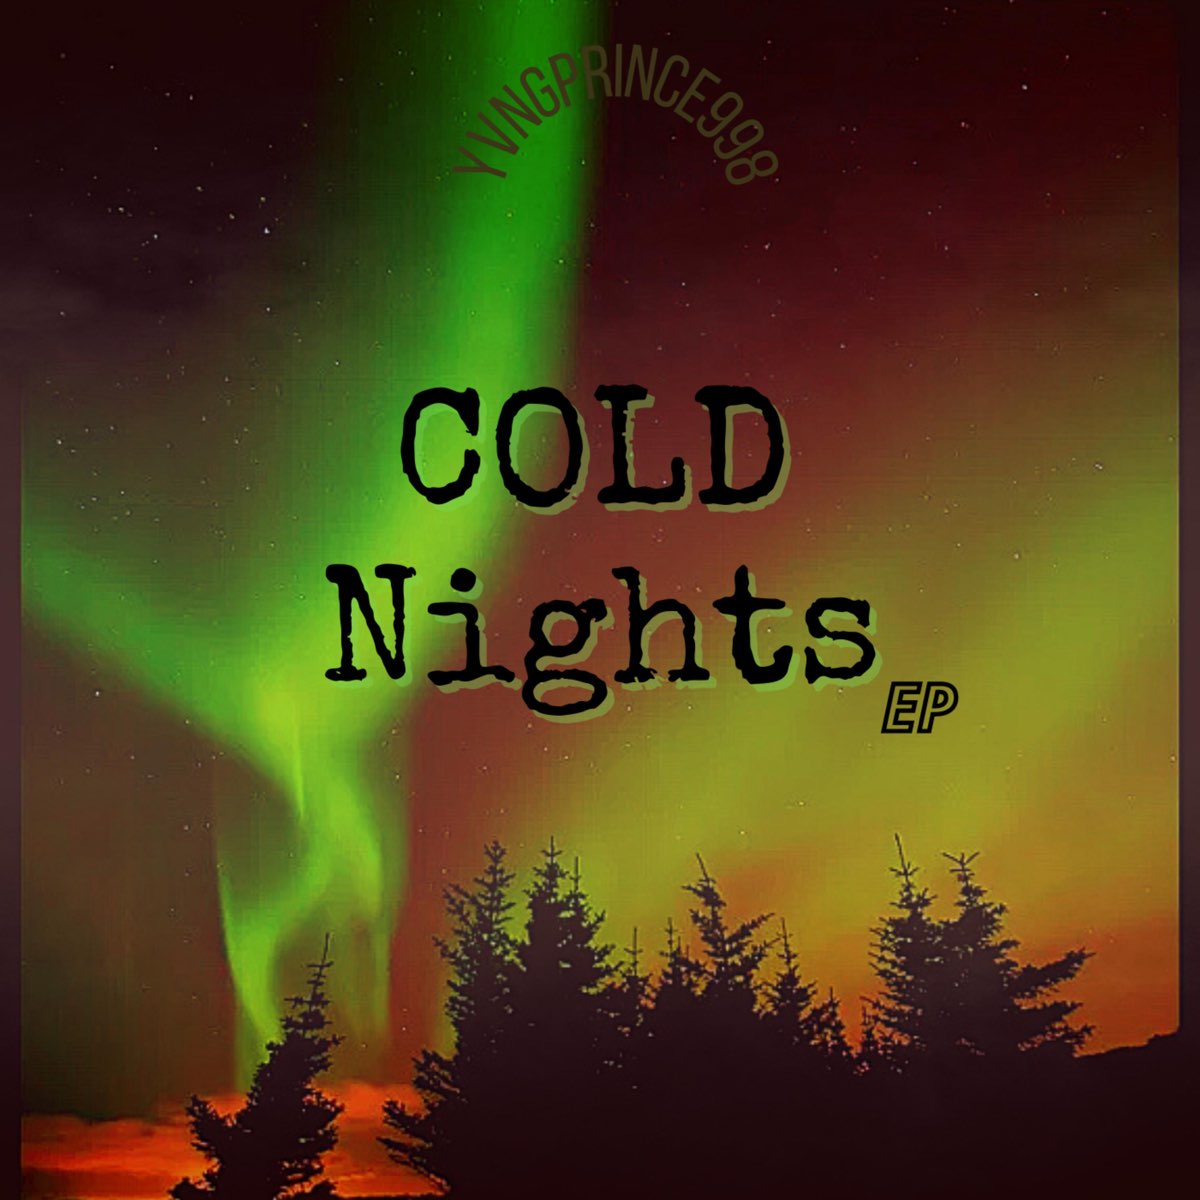 Cold Night. Cold nights 3